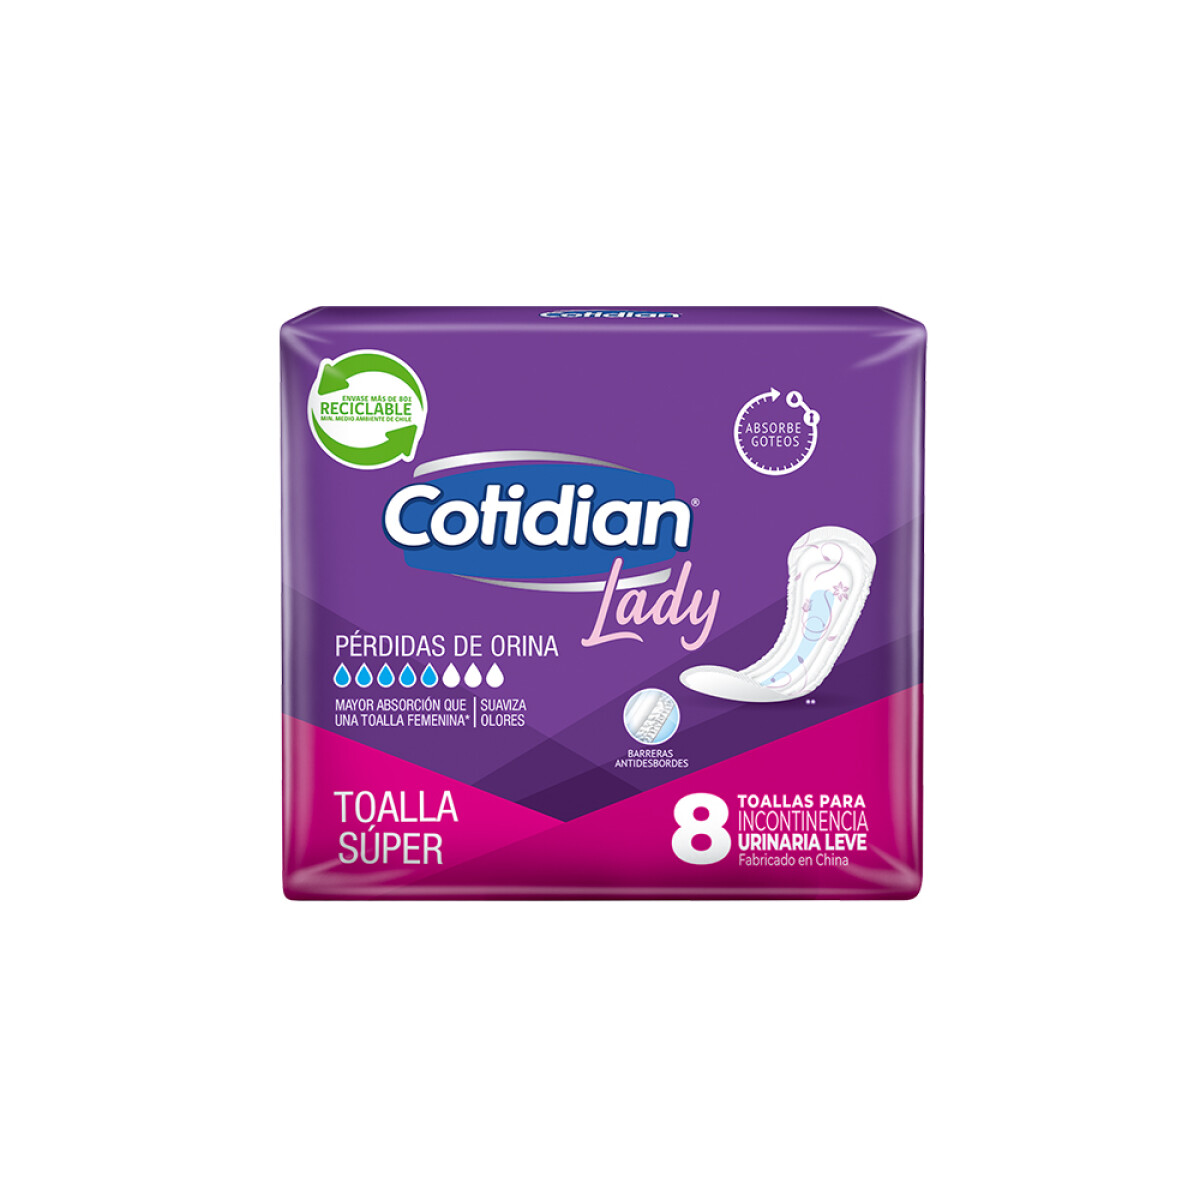 Toalla Cotidian Lady Super x8 